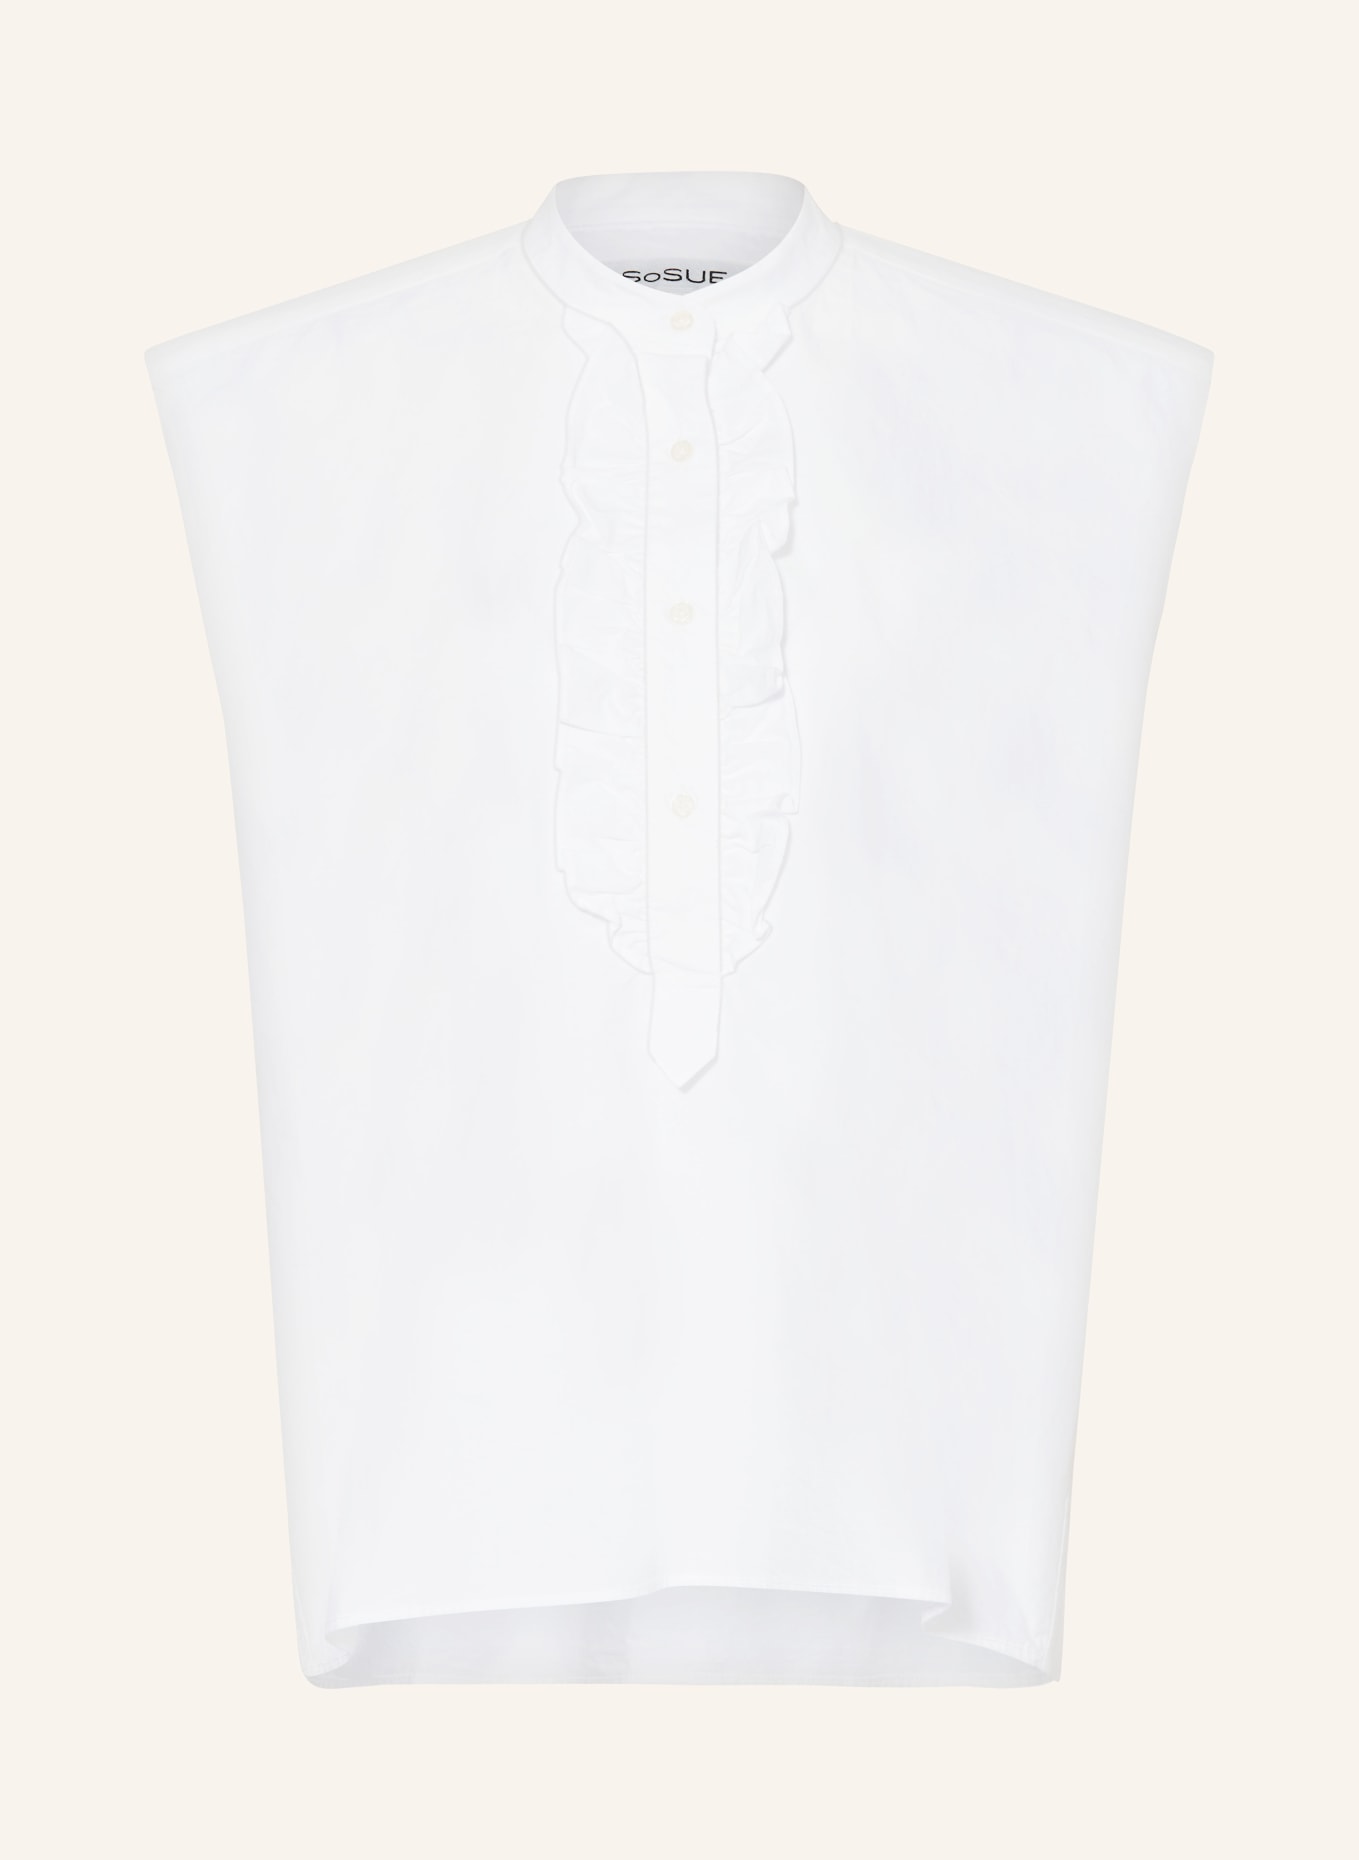 SoSUE Blouse top BARCELONA with ruffles, Color: WHITE (Image 1)